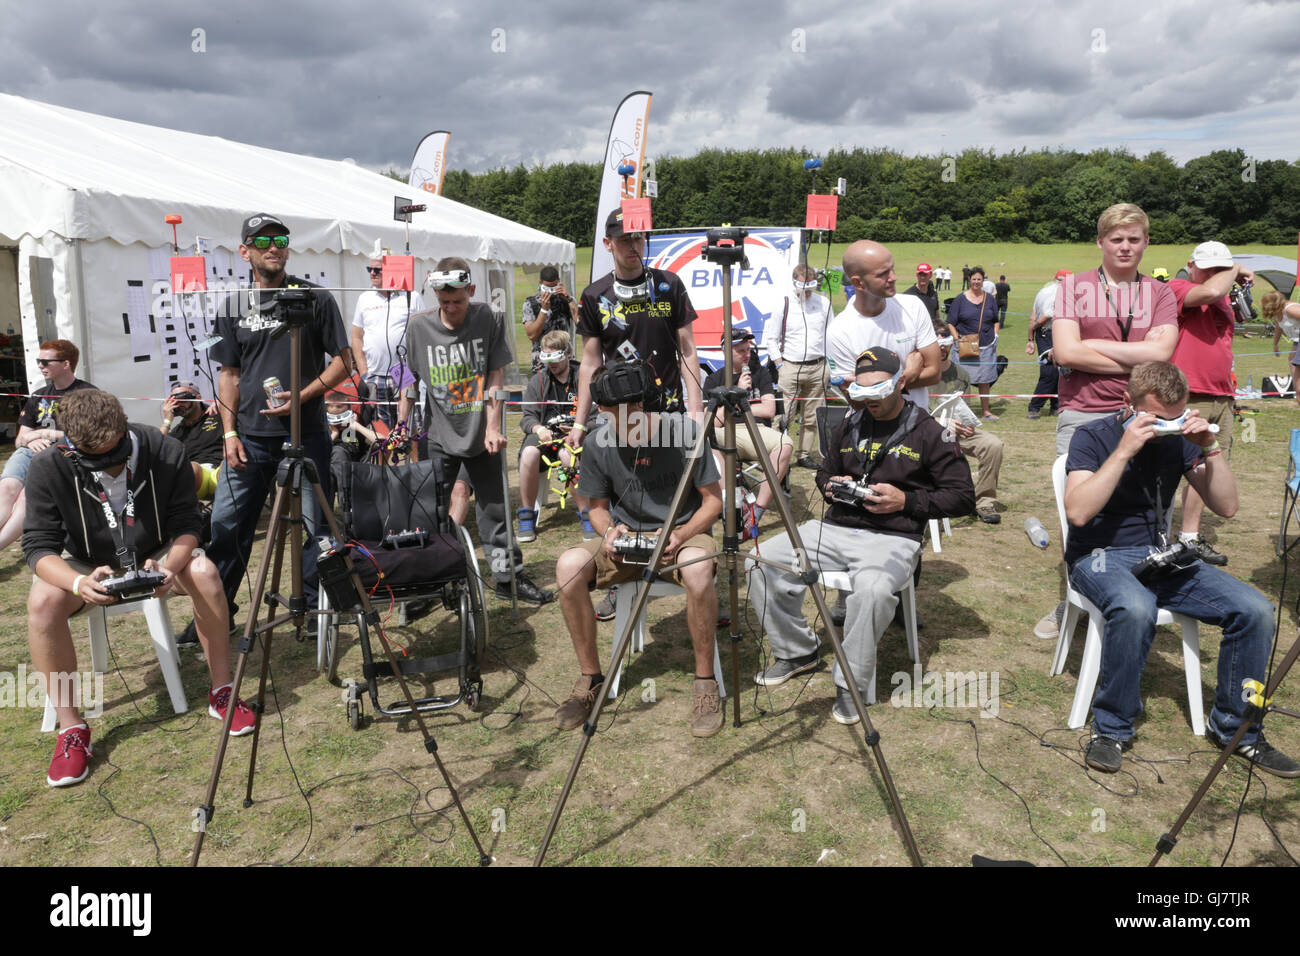 Drone Racing Queen's Cup 2016. Pilots and their spotters during a race at the UK drone racing competition, Stock Photo